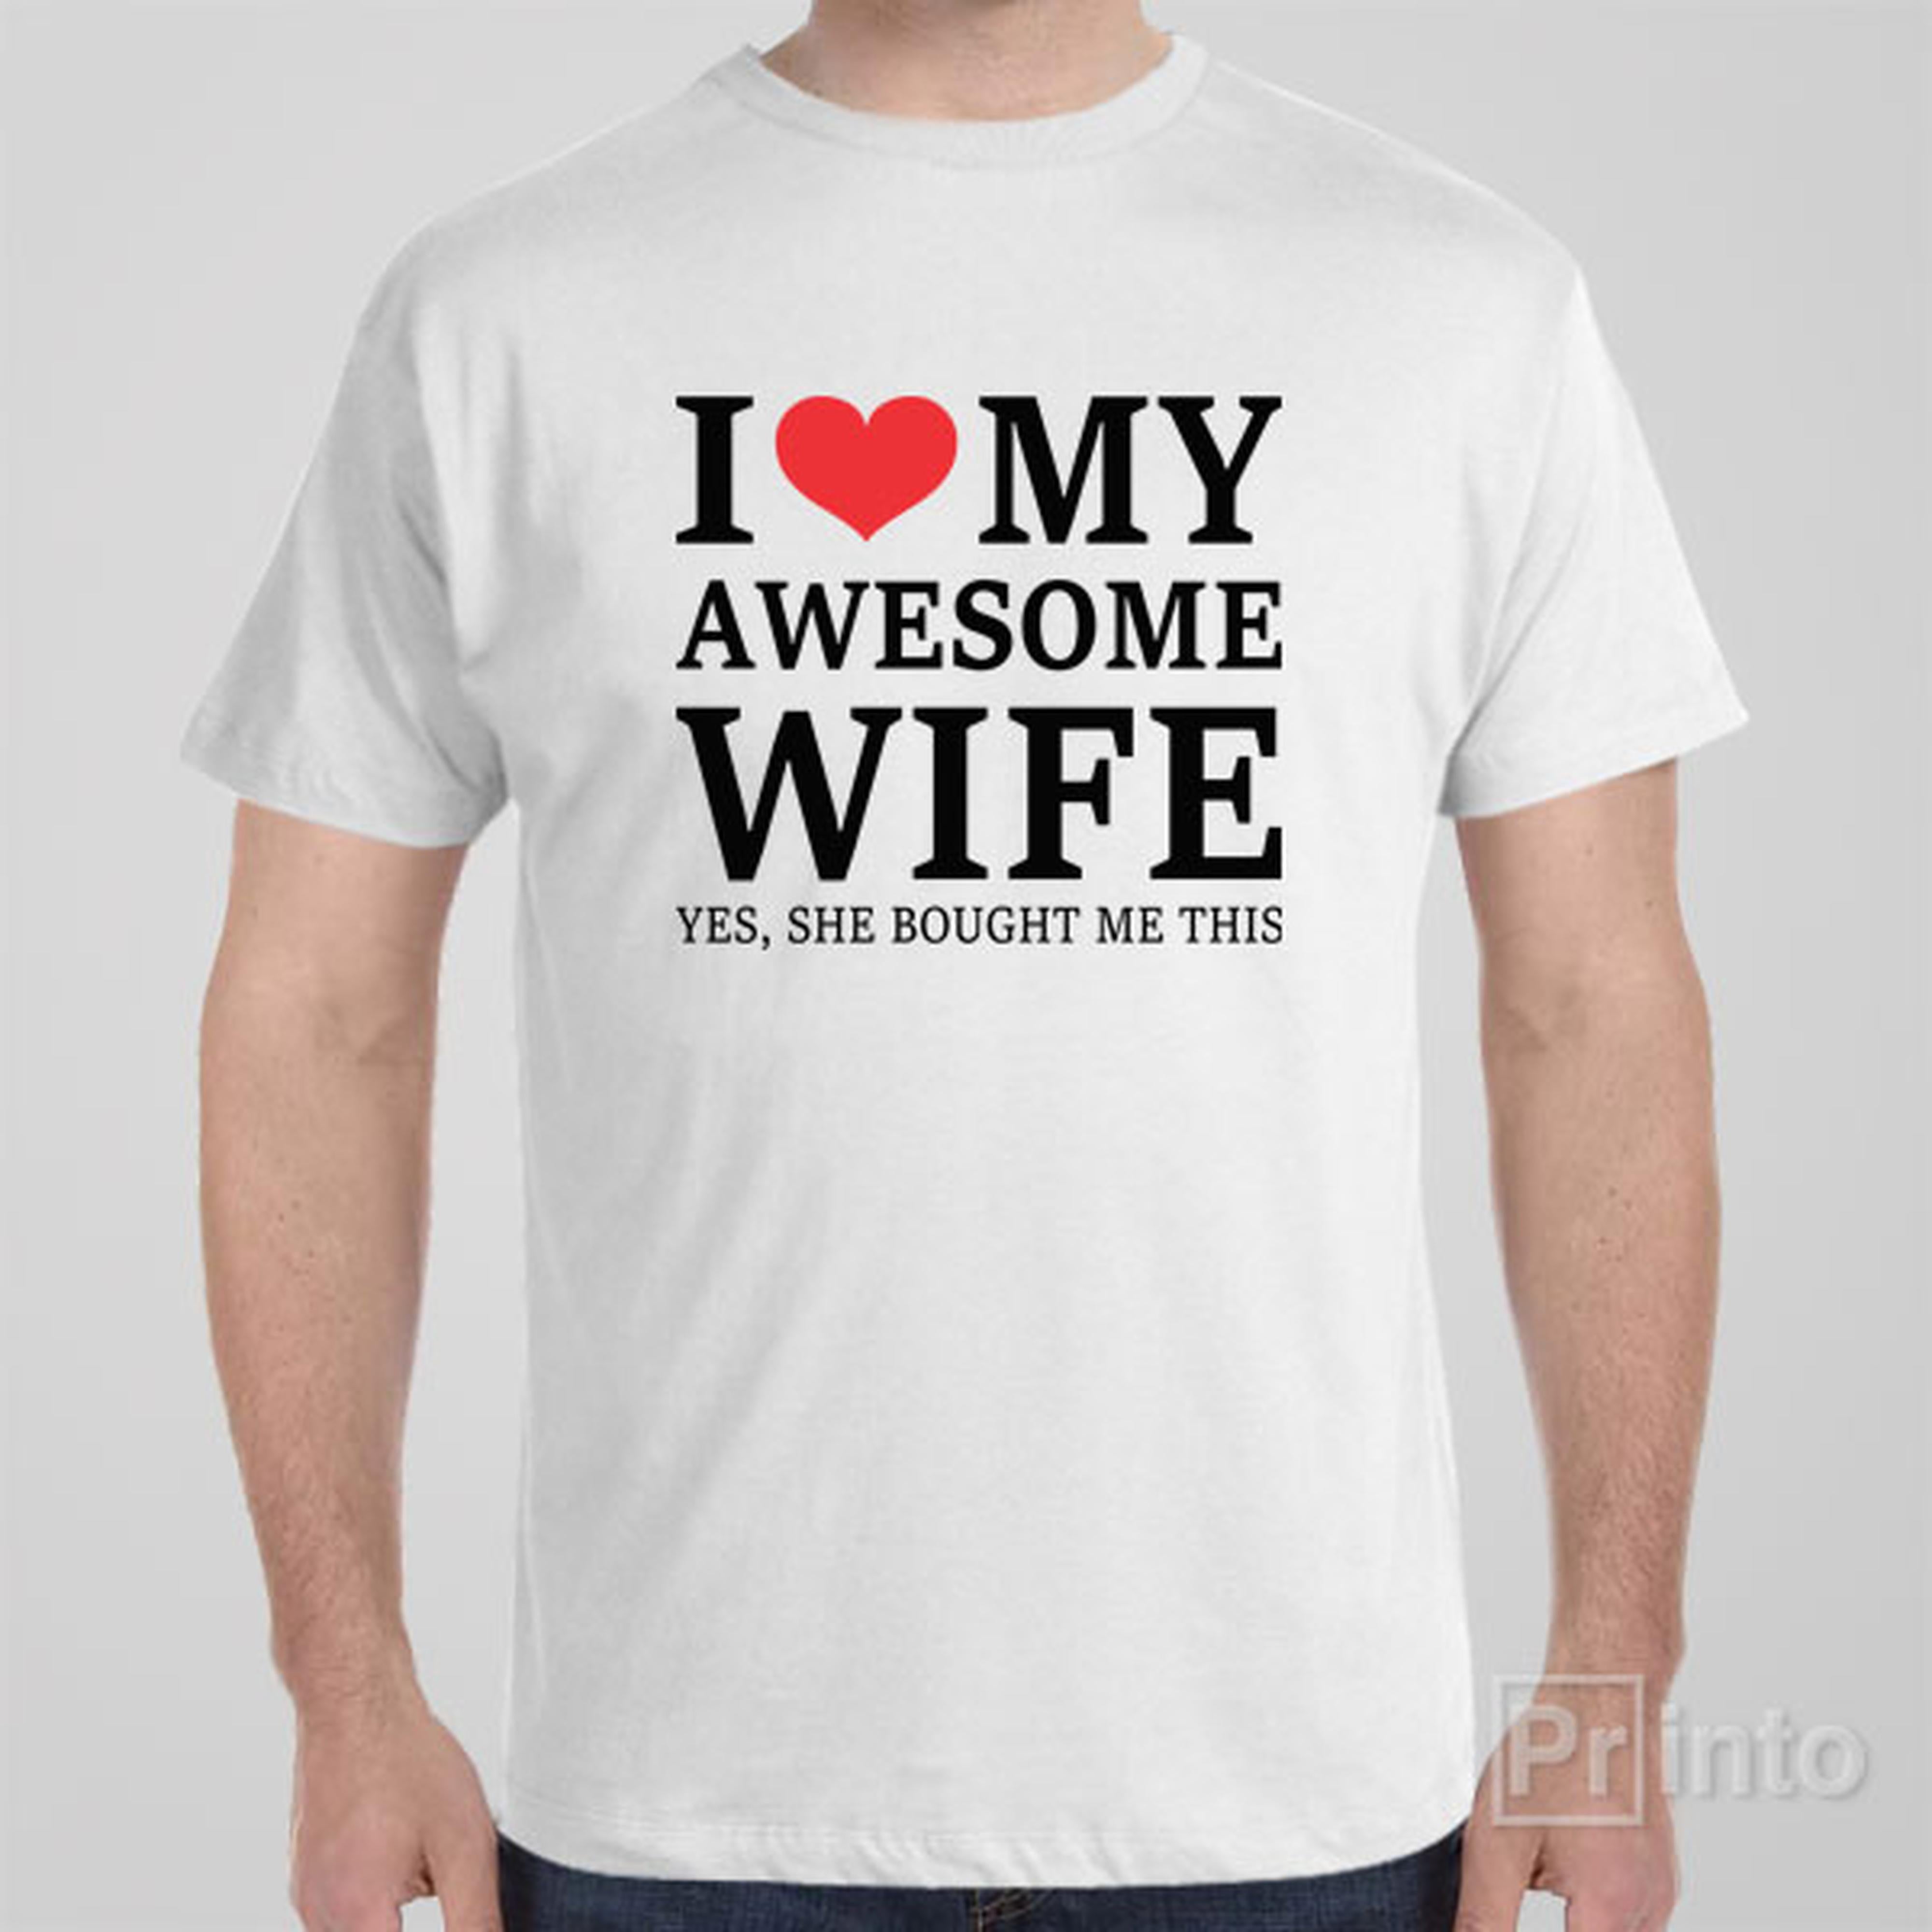 i-love-my-awesome-wife-t-shirt